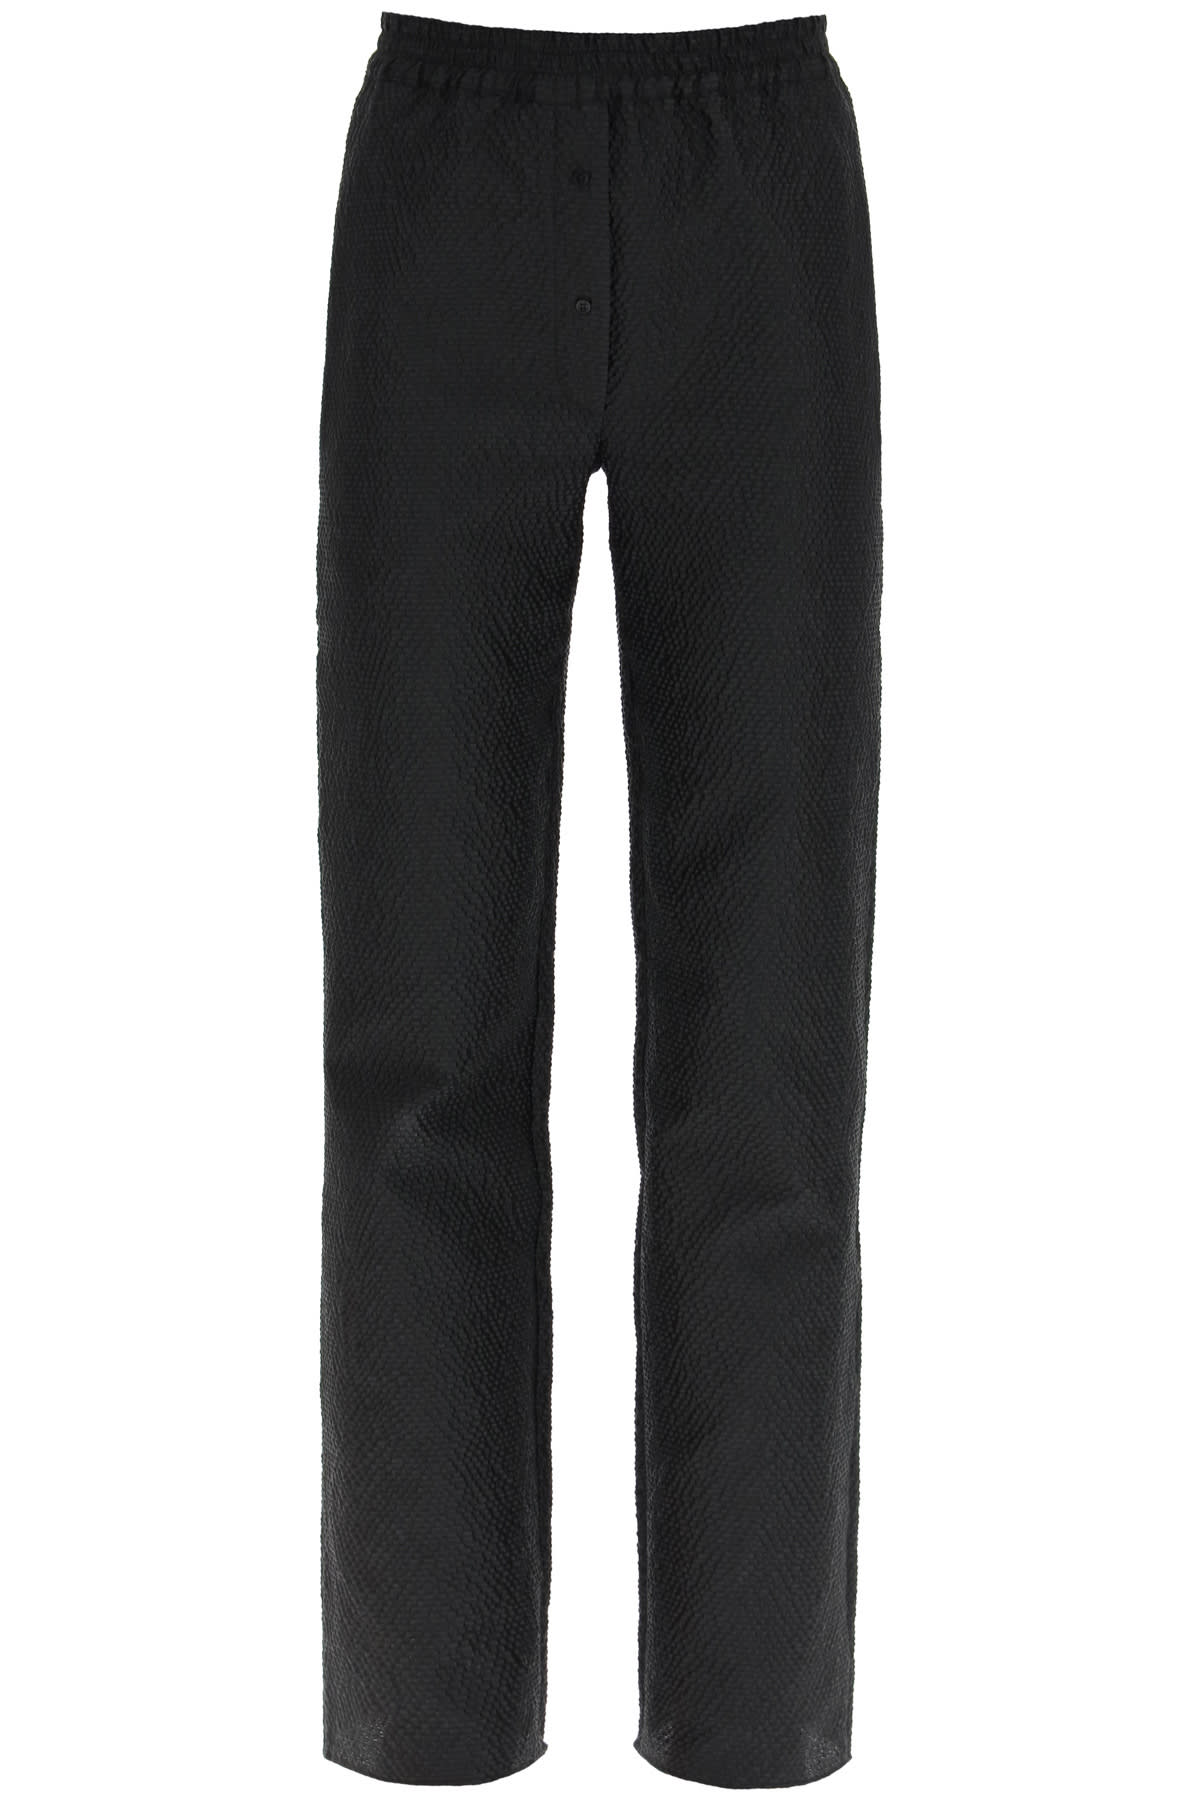 Cecilie Bahnsen Amber Trousers